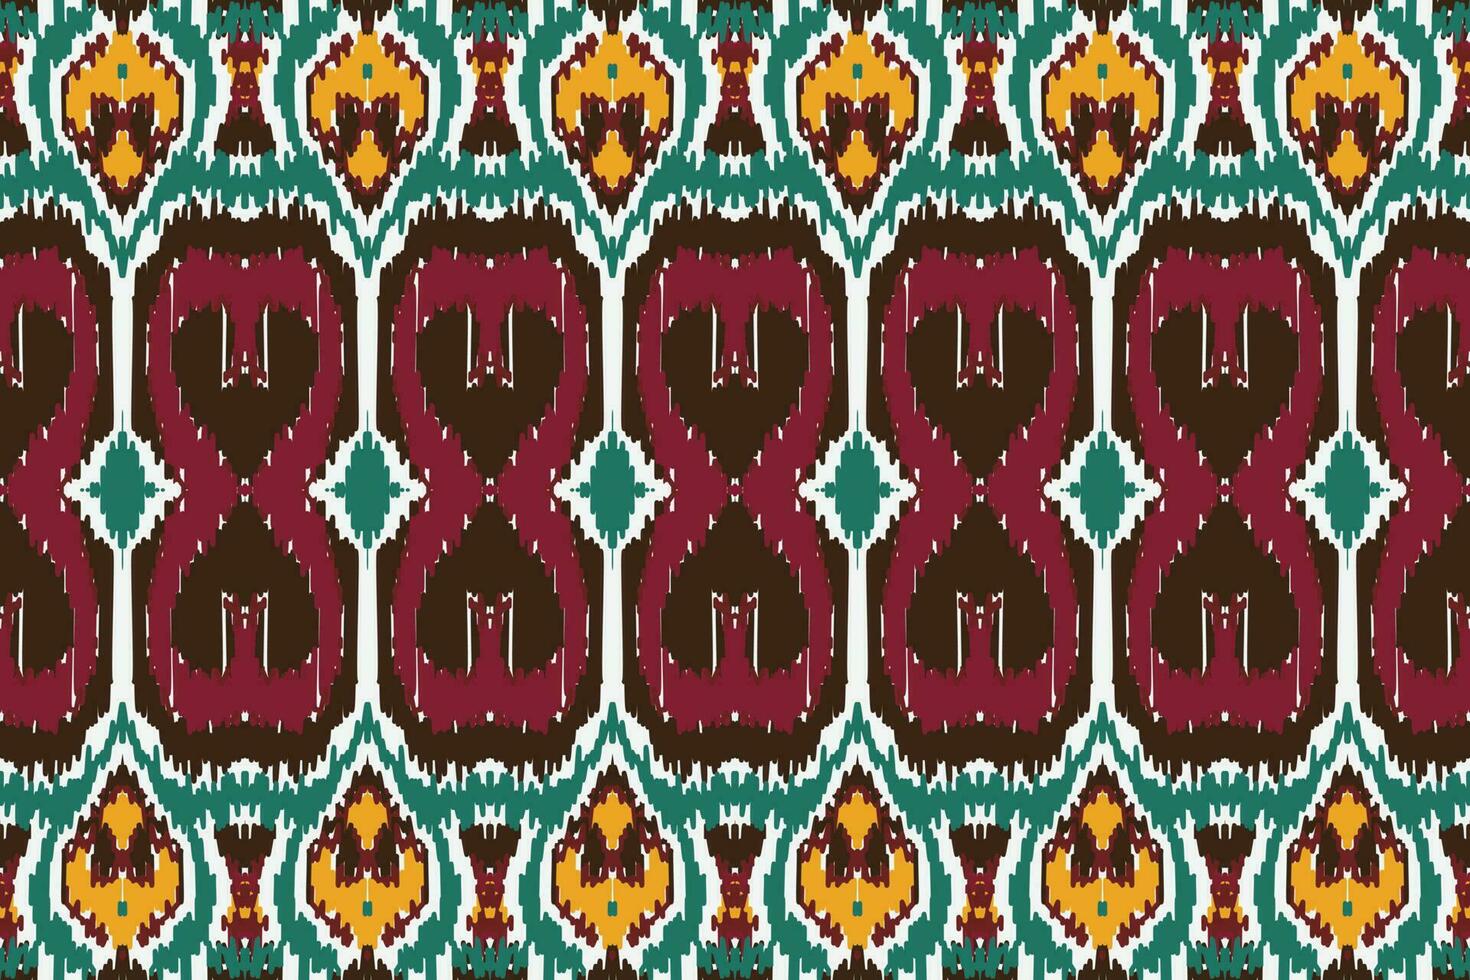 Motif Ikat seamless Pattern embroidery background. geometric ethnic oriental pattern traditional. Ikat Aztec style abstract vector illustration. design for print texture,fabric,saree,sari,carpet.